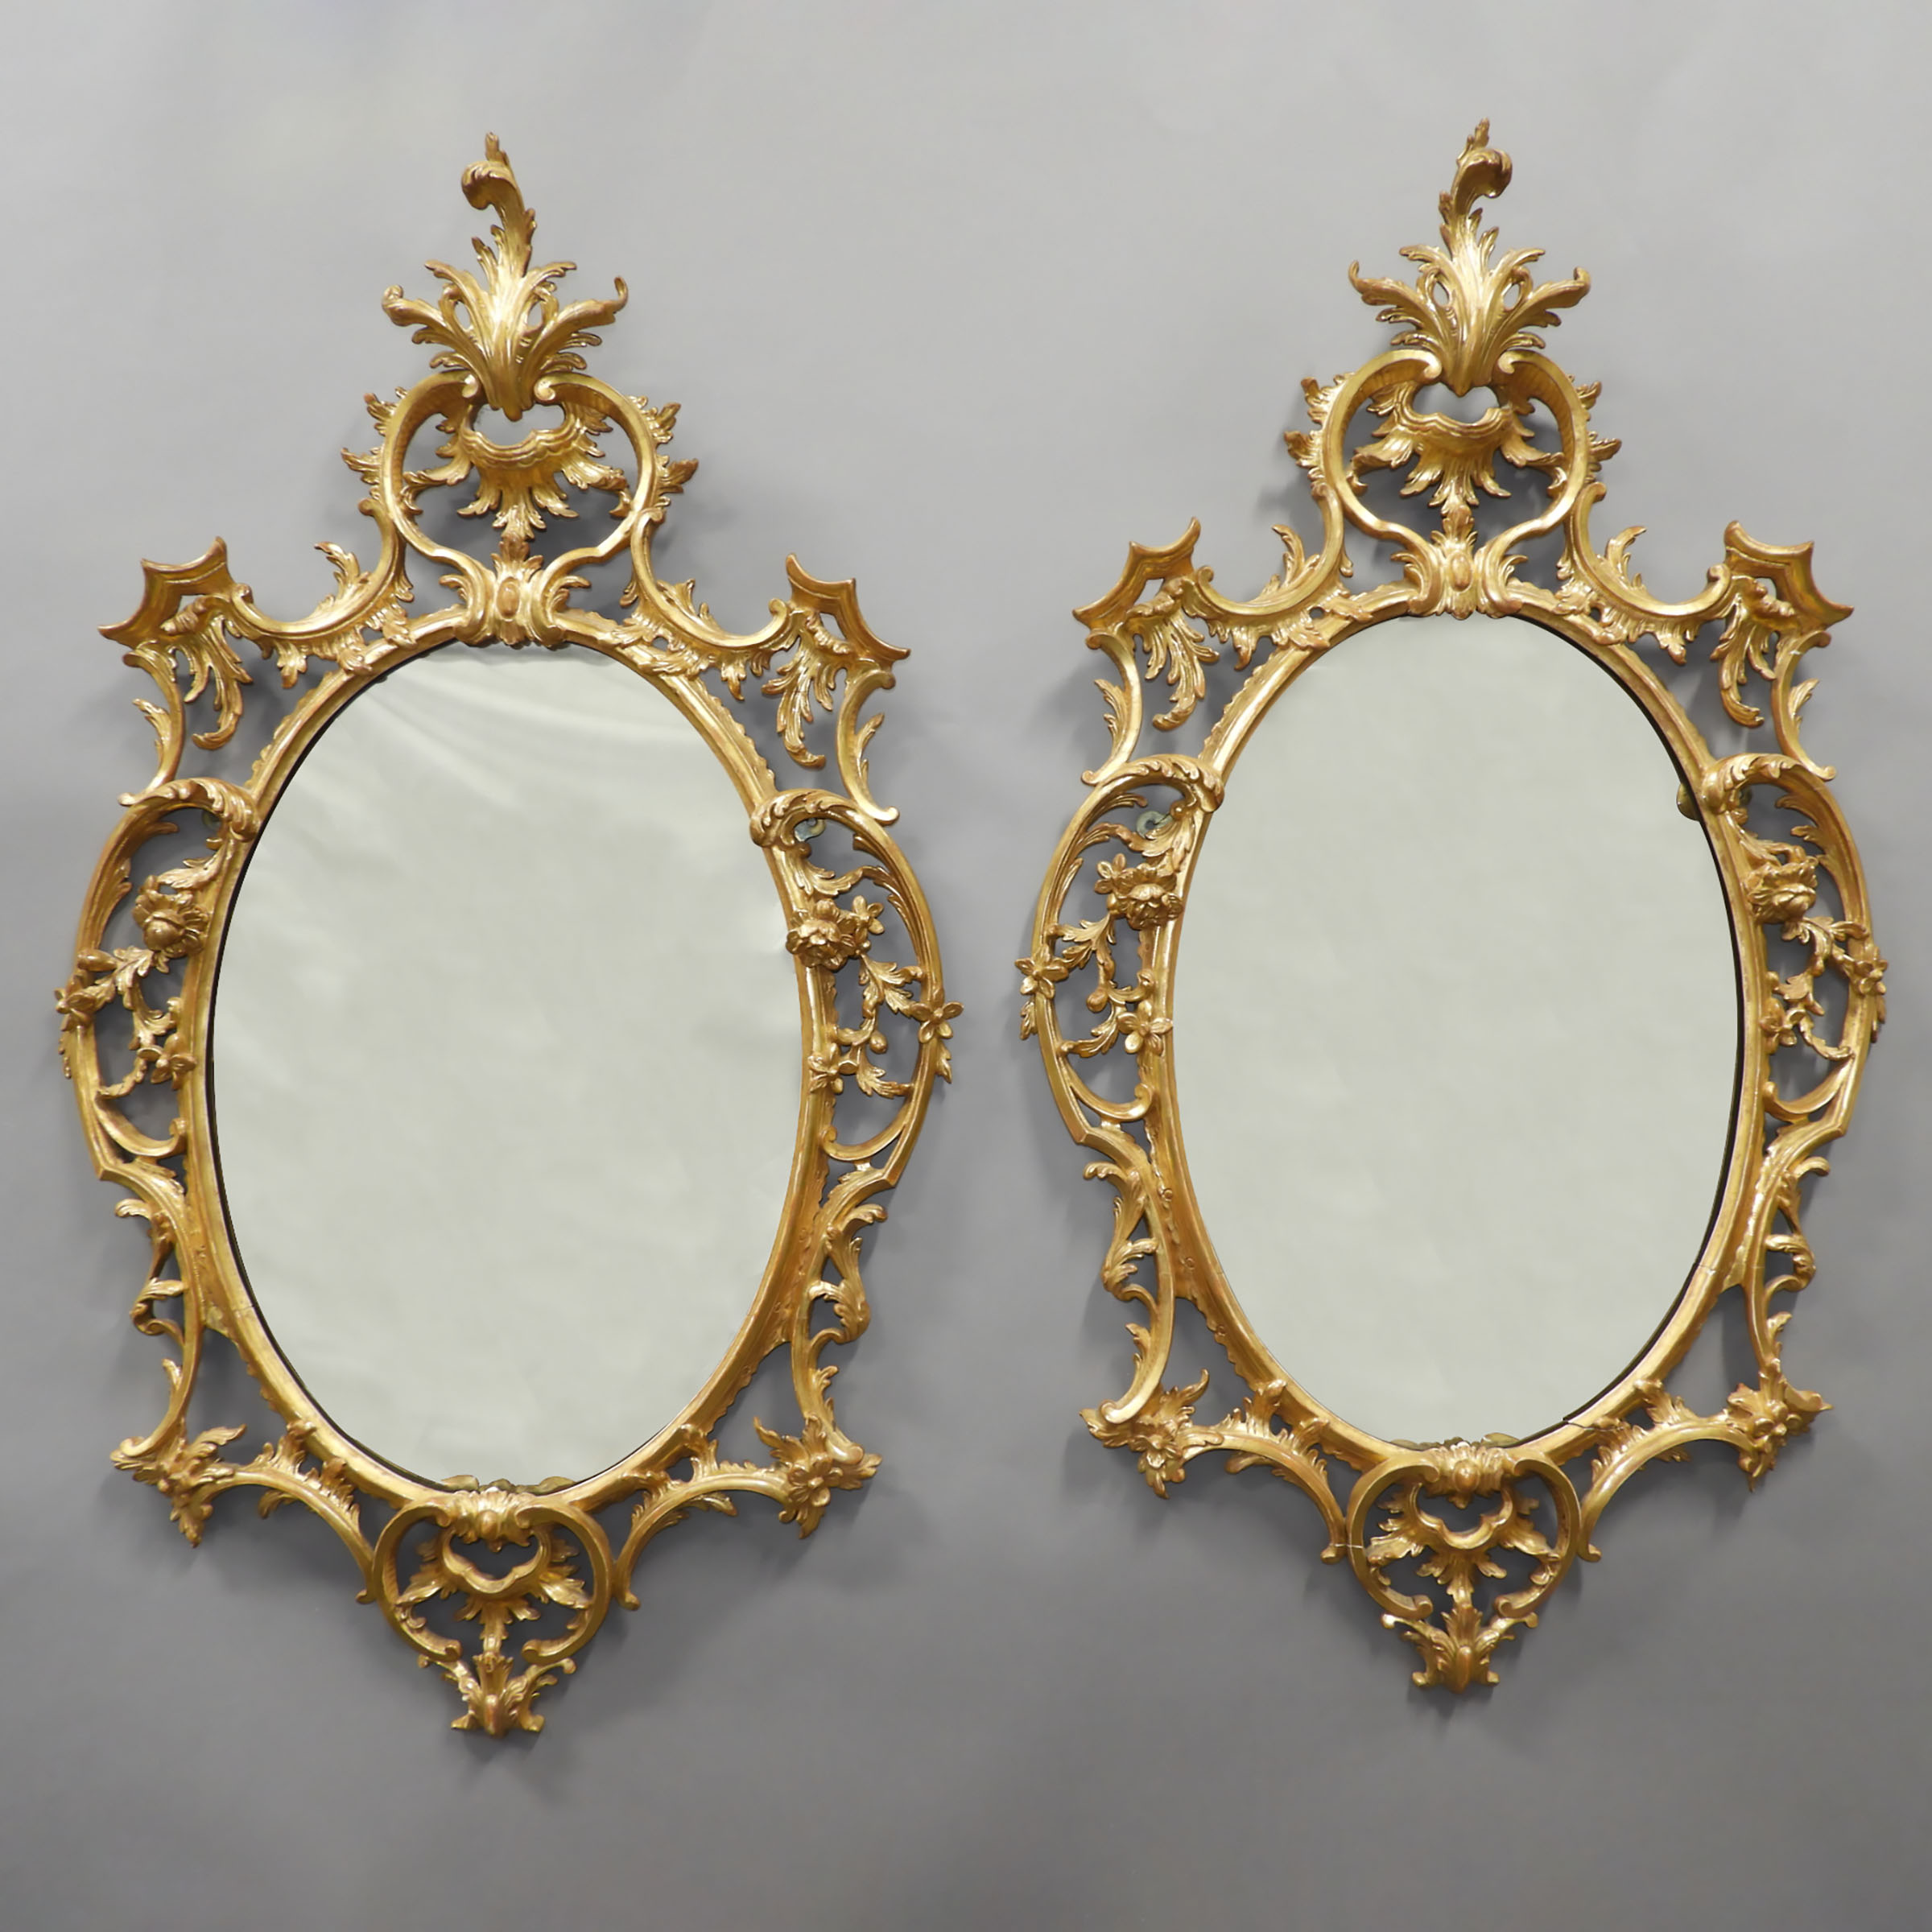 Pair of Rococo Giltwood Mirrors, 18th/19th  century